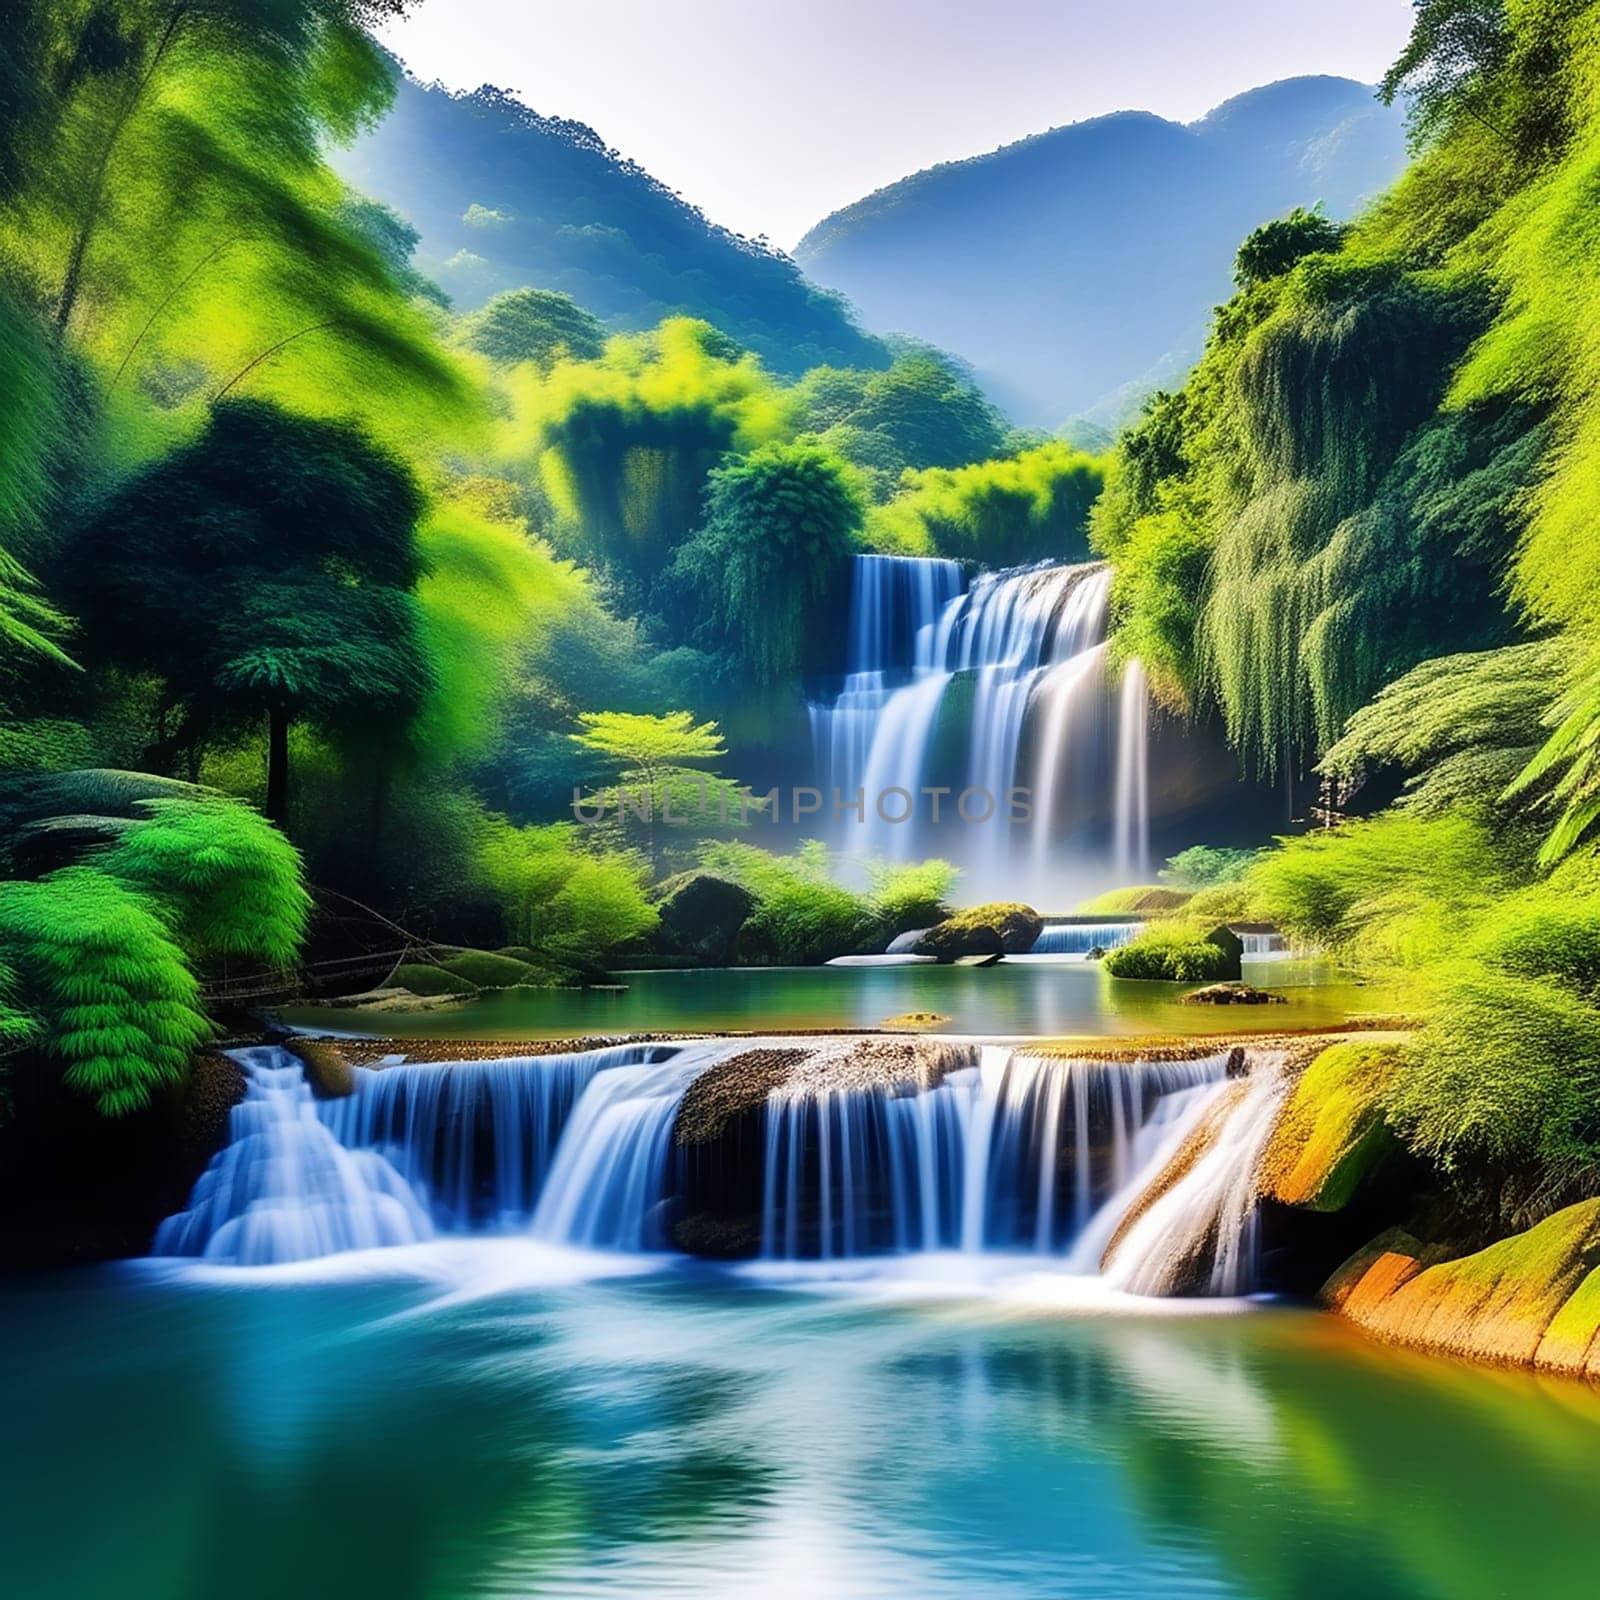 Flowing Serenity: Embracing the Tranquil Streams and Lush Forests by Petrichor